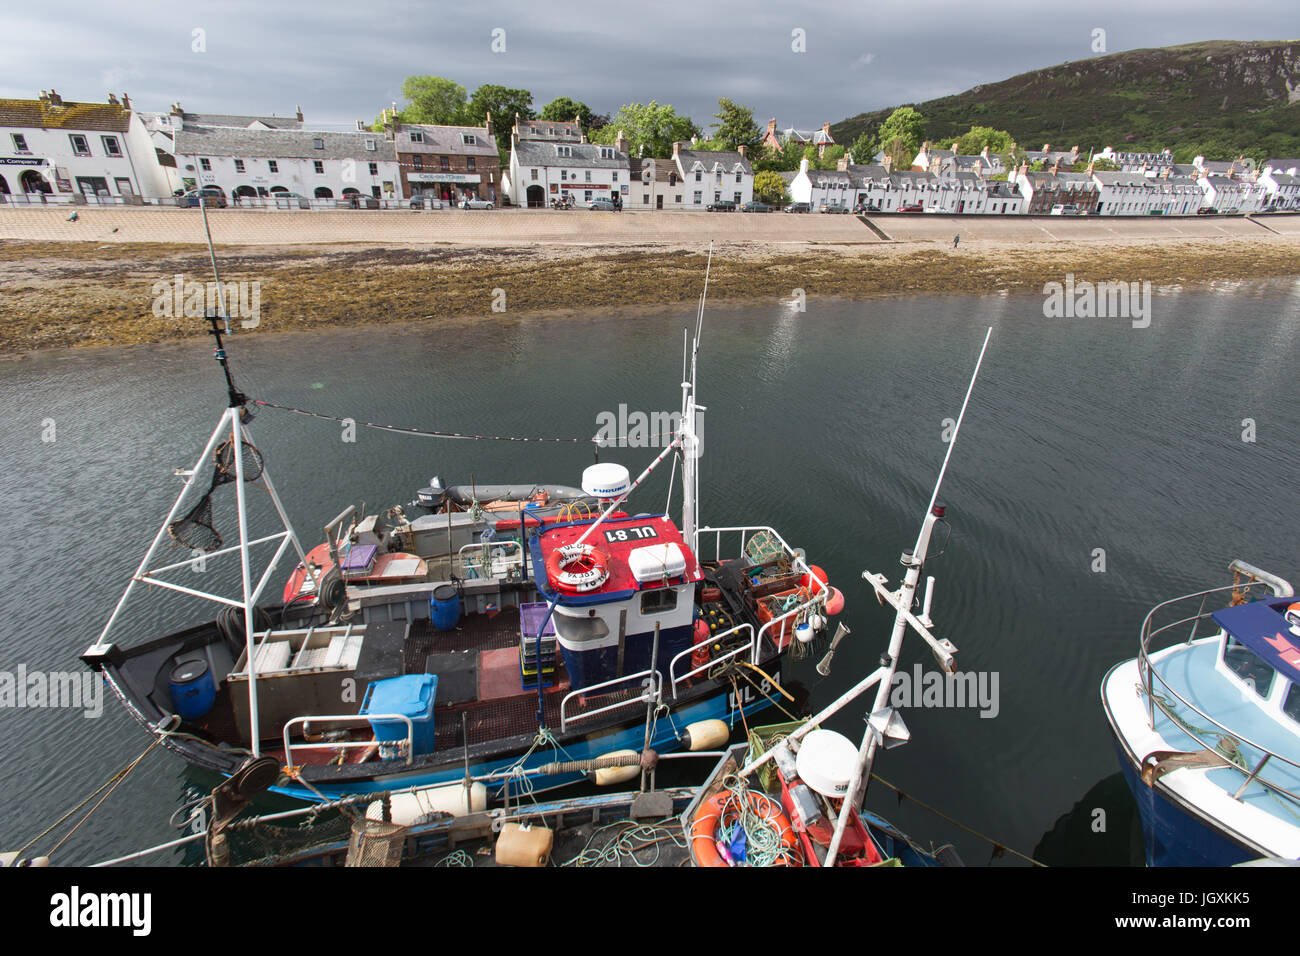 Town of Ullapool, Scotland. Picturesque view of Ullapool’s harbour and waterfront, with Shore Street in the background. Stock Photo